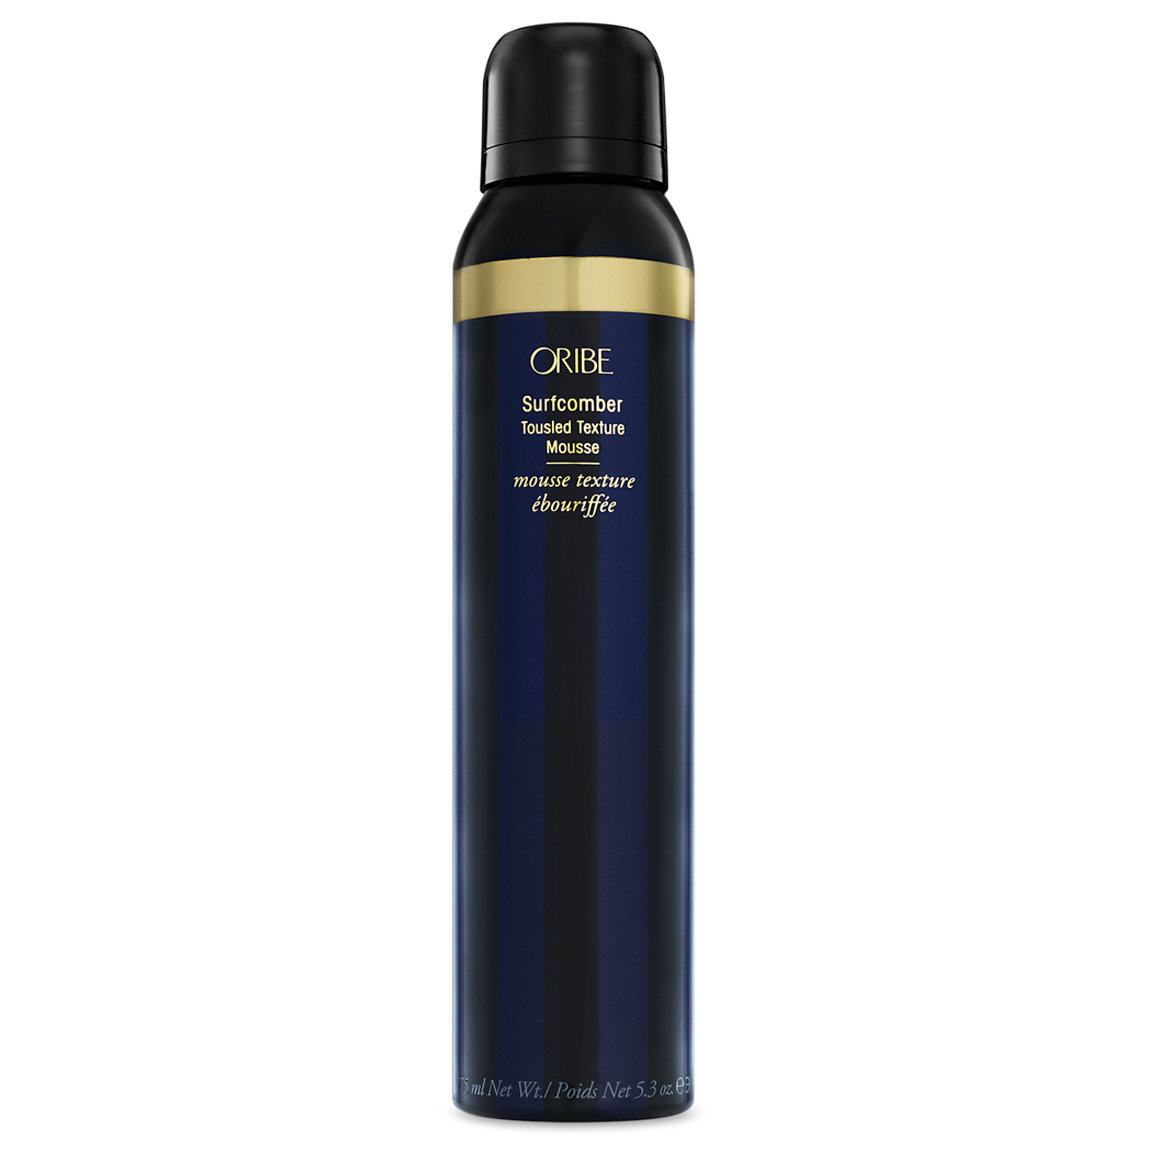 Oribe Surfcomber Tousled Texture Mousse 5.7 oz alternative view 1 - product swatch.